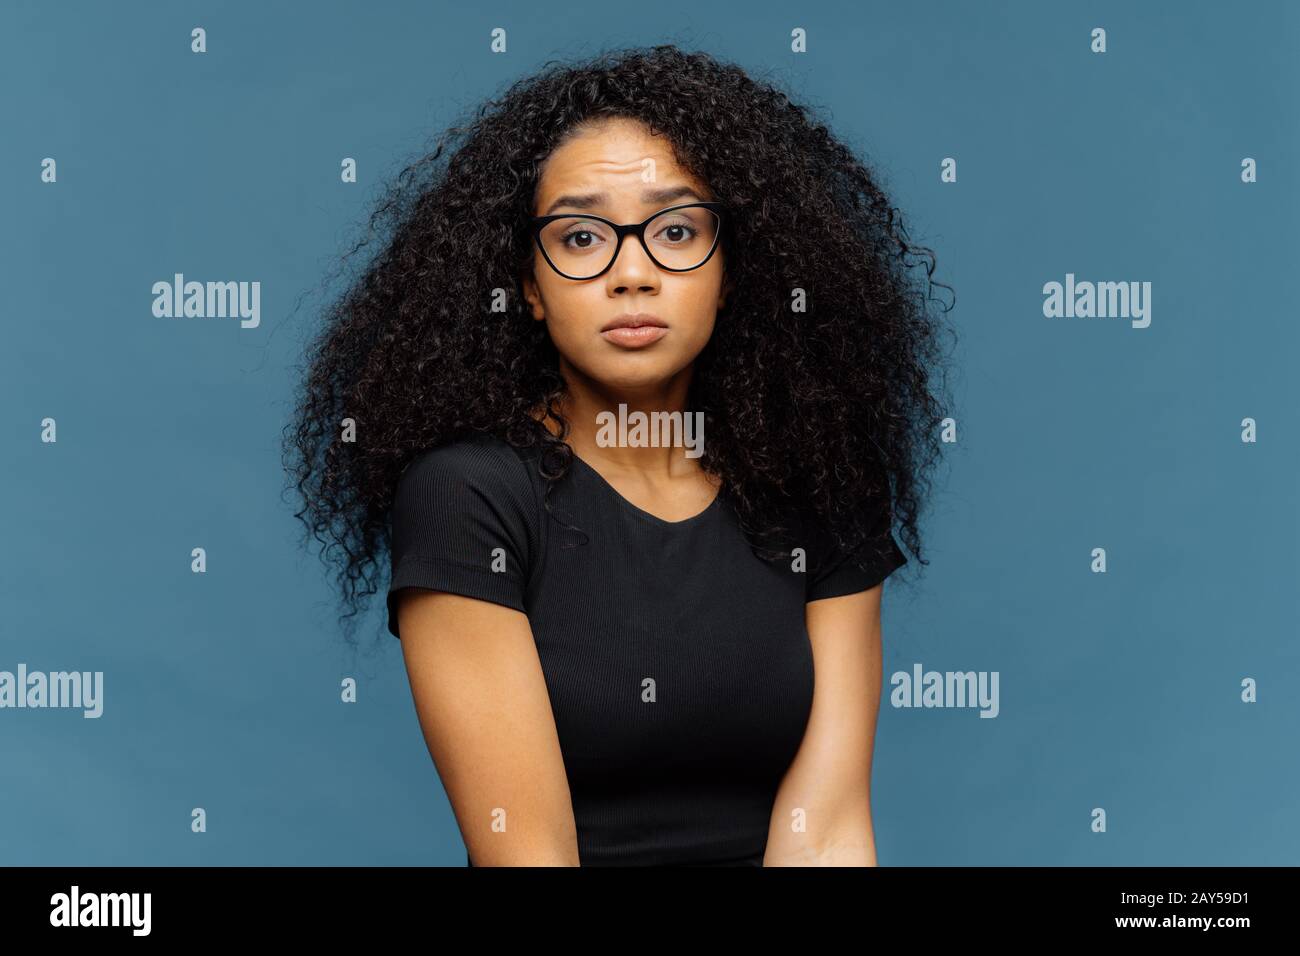 Photo of indignant puzzled Afro American woman looks surprisingly at camera, wears casual black t shirt and spectacles, poses against blue background. Stock Photo